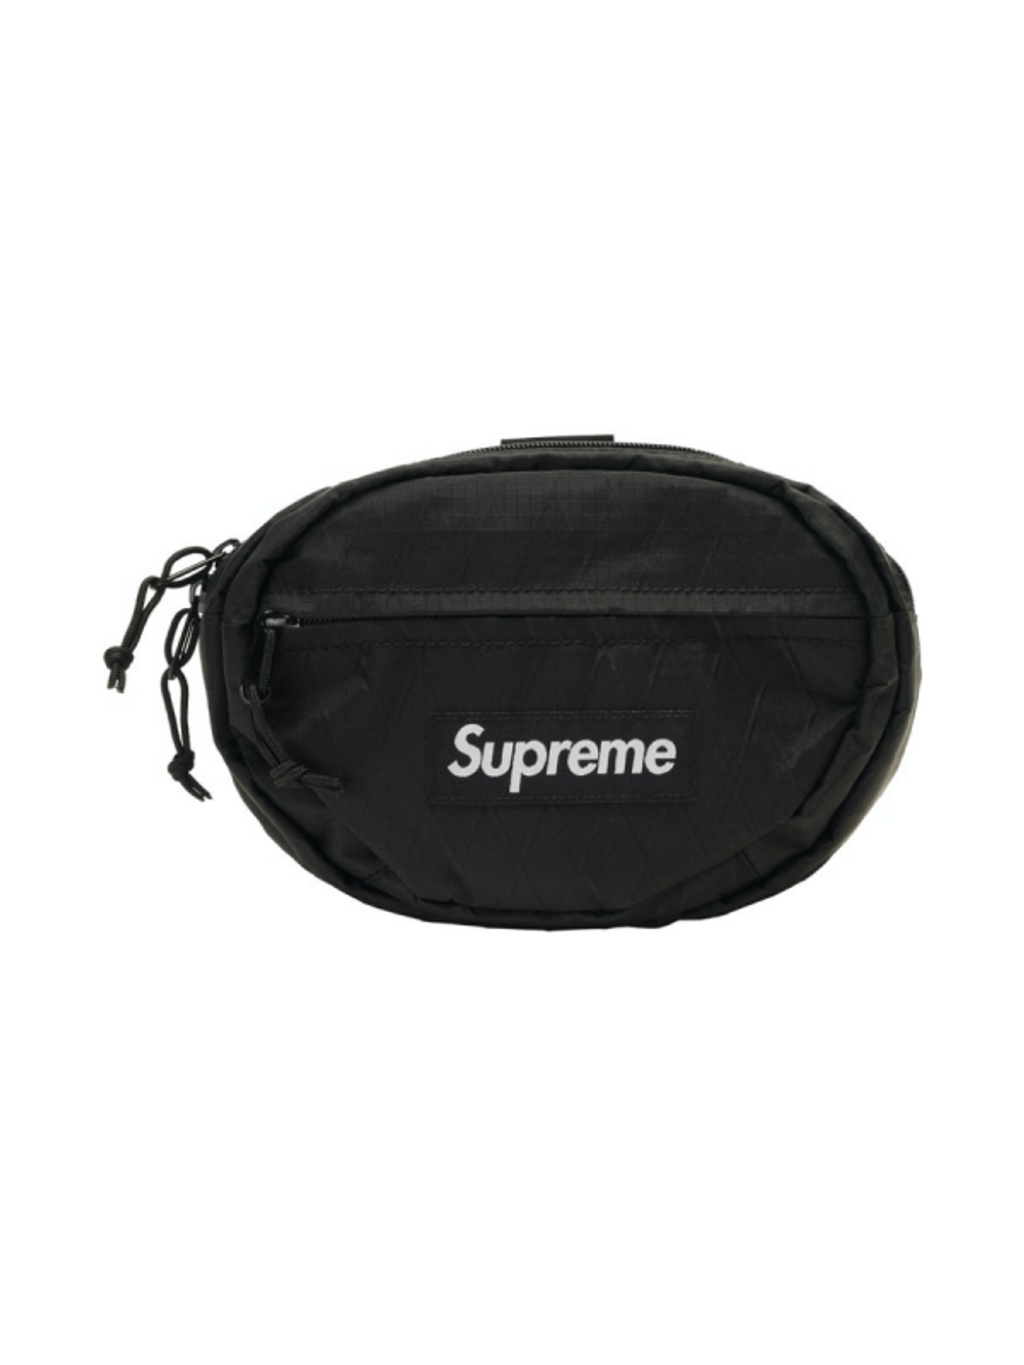 Supreme Waist Bag (FW18) Red - Size One Size